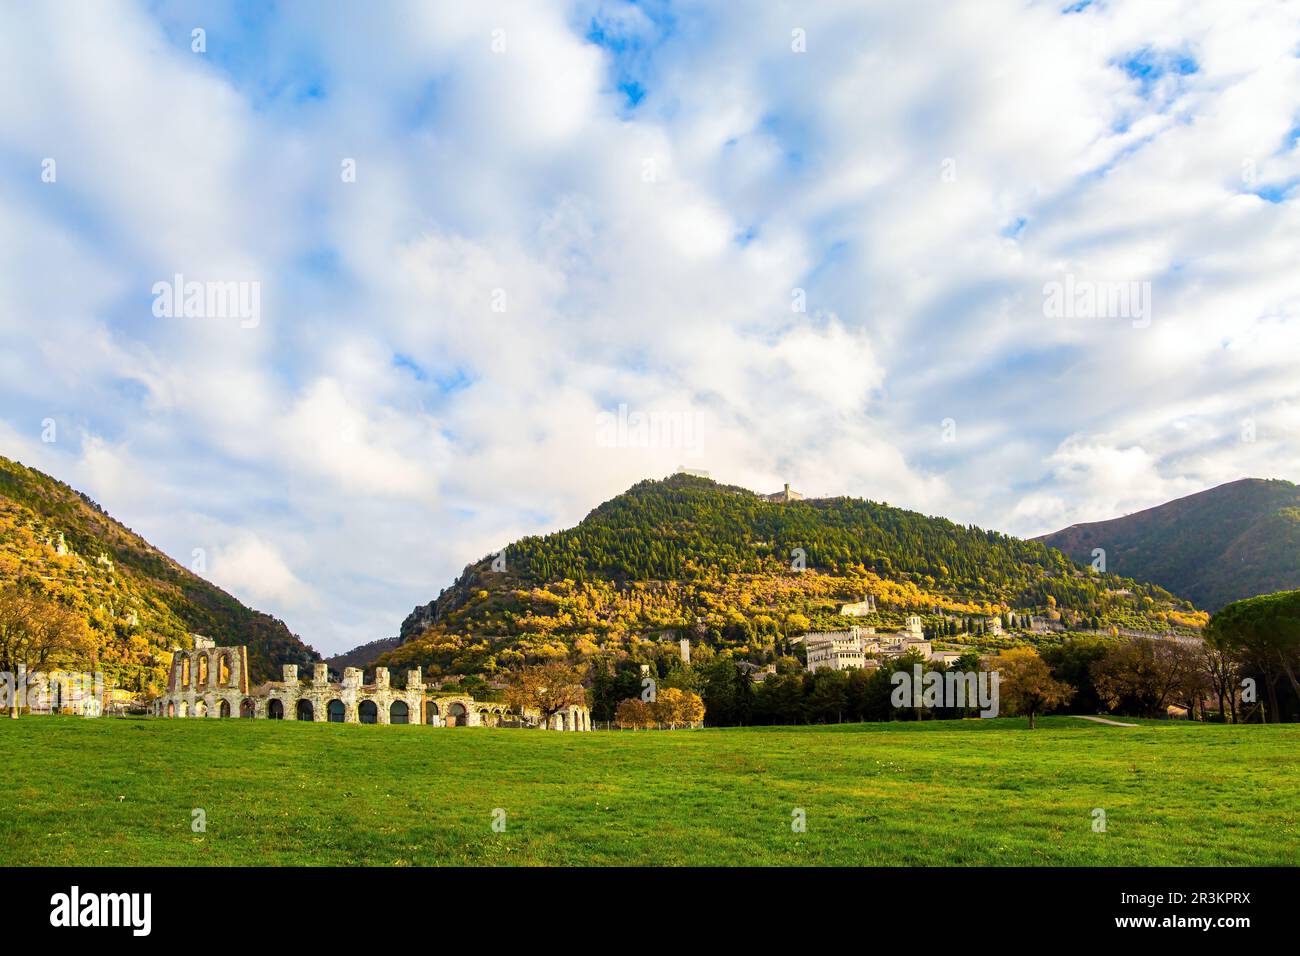 The Gubbio in the Umbrian mountains Stock Photo